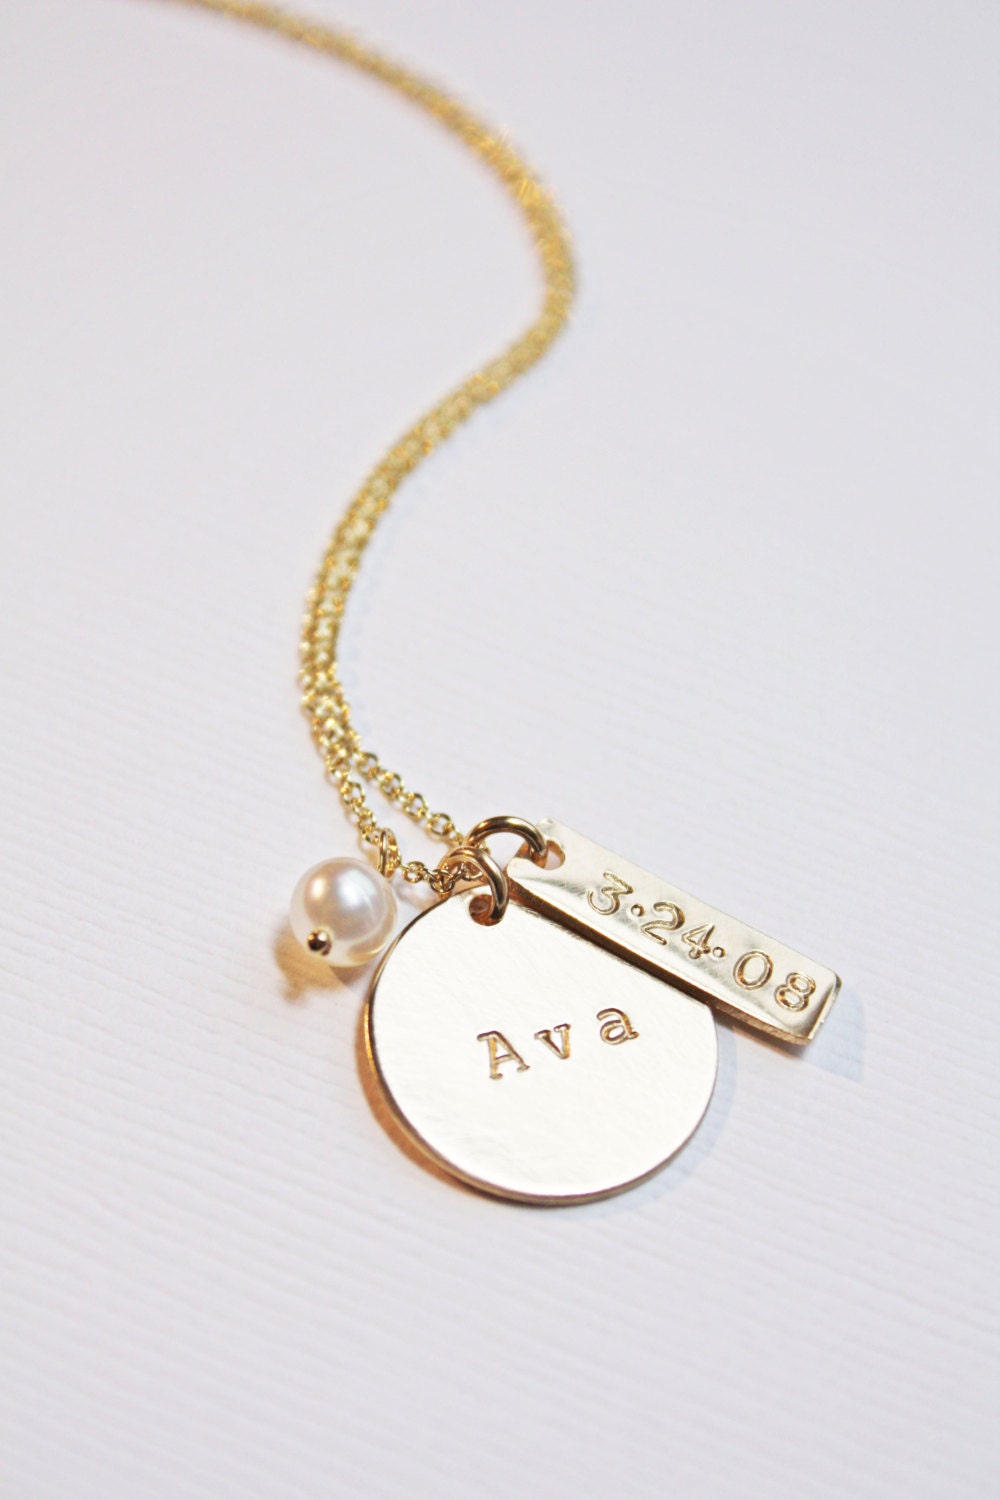 Gold Baby Name Necklace with Pearl and by PiccolaCustomJewelry